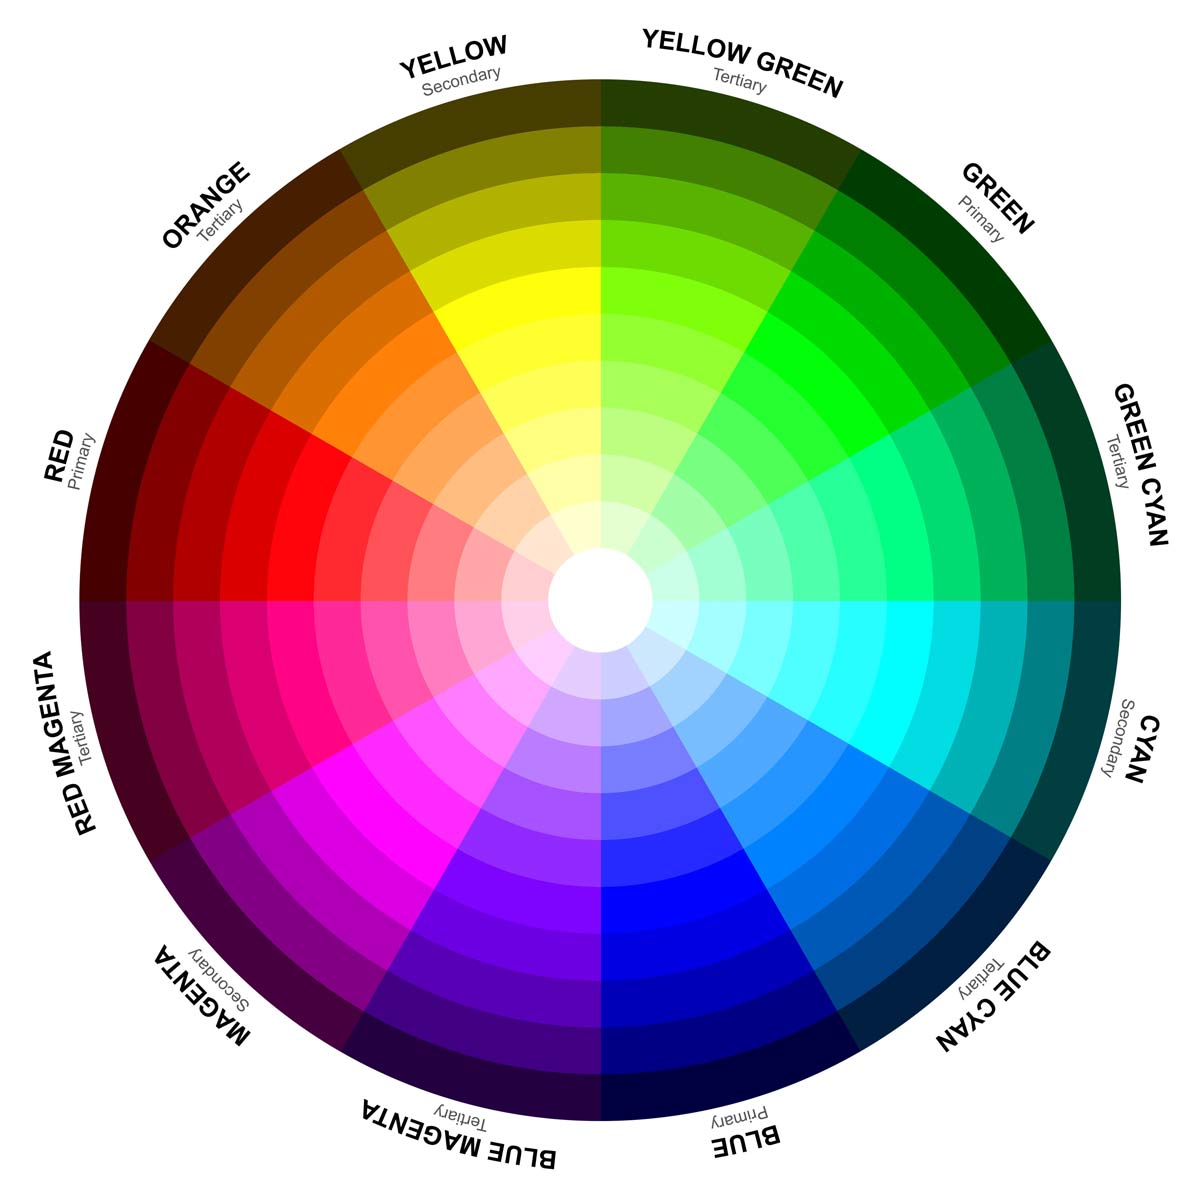 This color wheel is described in the text.